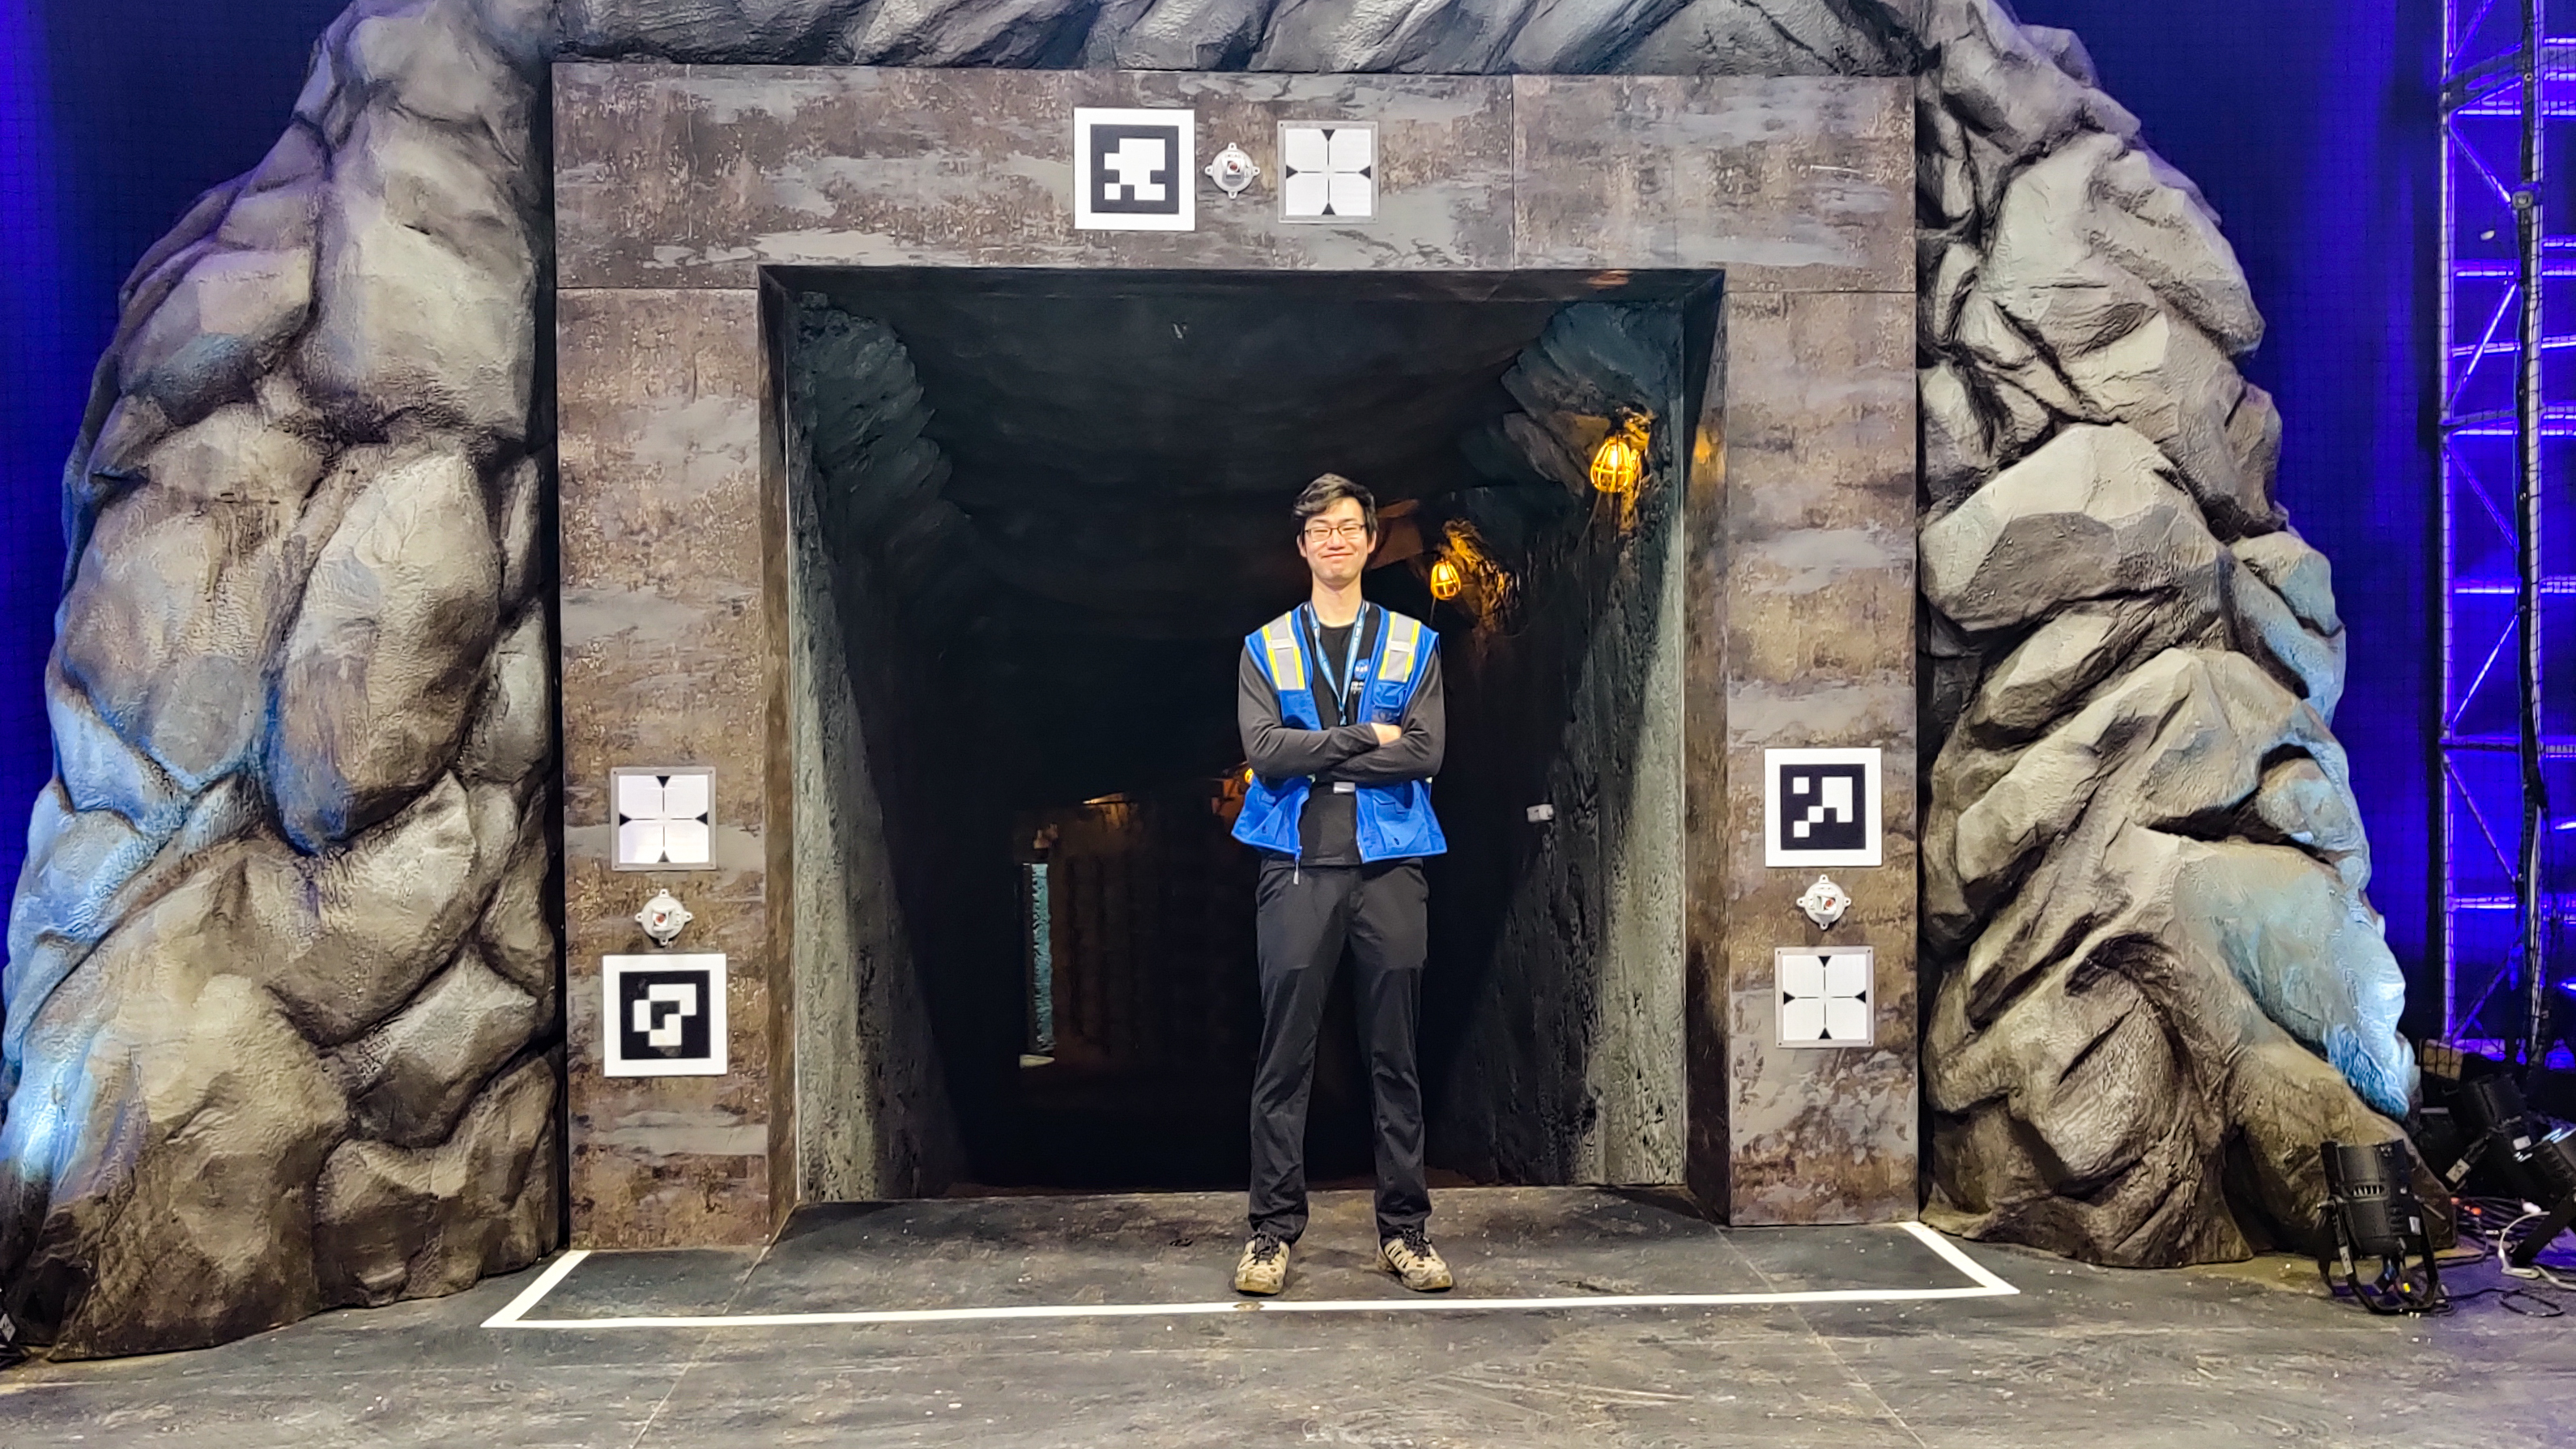 Fan stands with his arms crossed in front of a fake rock wall and spotlights framing a rocky tunnel.